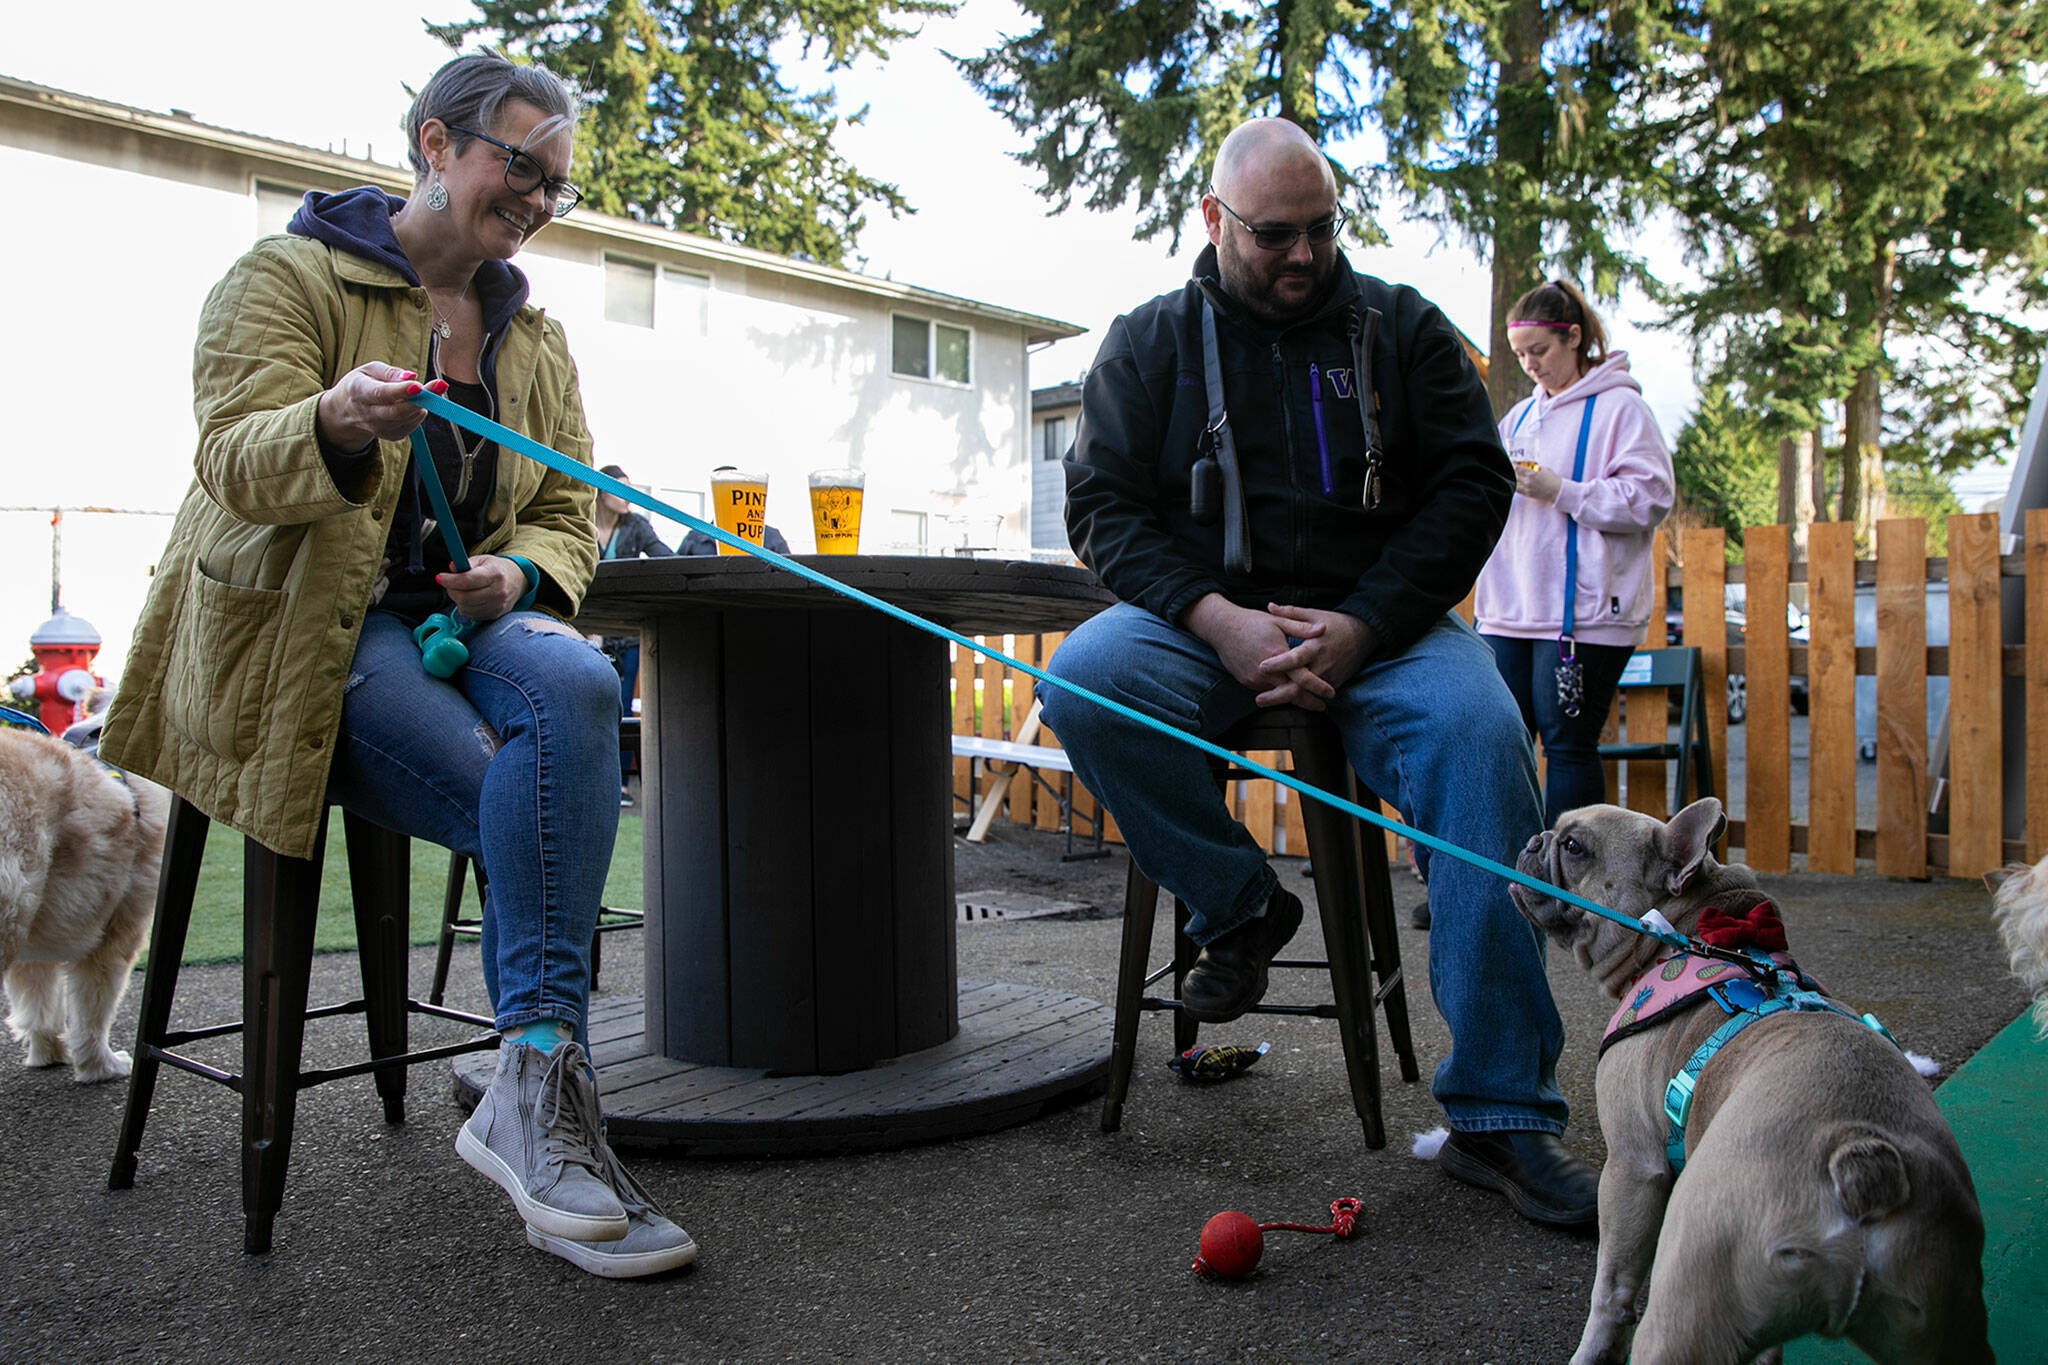 Andrea Rynearson and her French bulldog, Kevin, hang out with Chase Quinton and a multitude of other dogs during Pints and Pups’ grand opening April 9 in Everett. (Ryan Berry / The Herald)